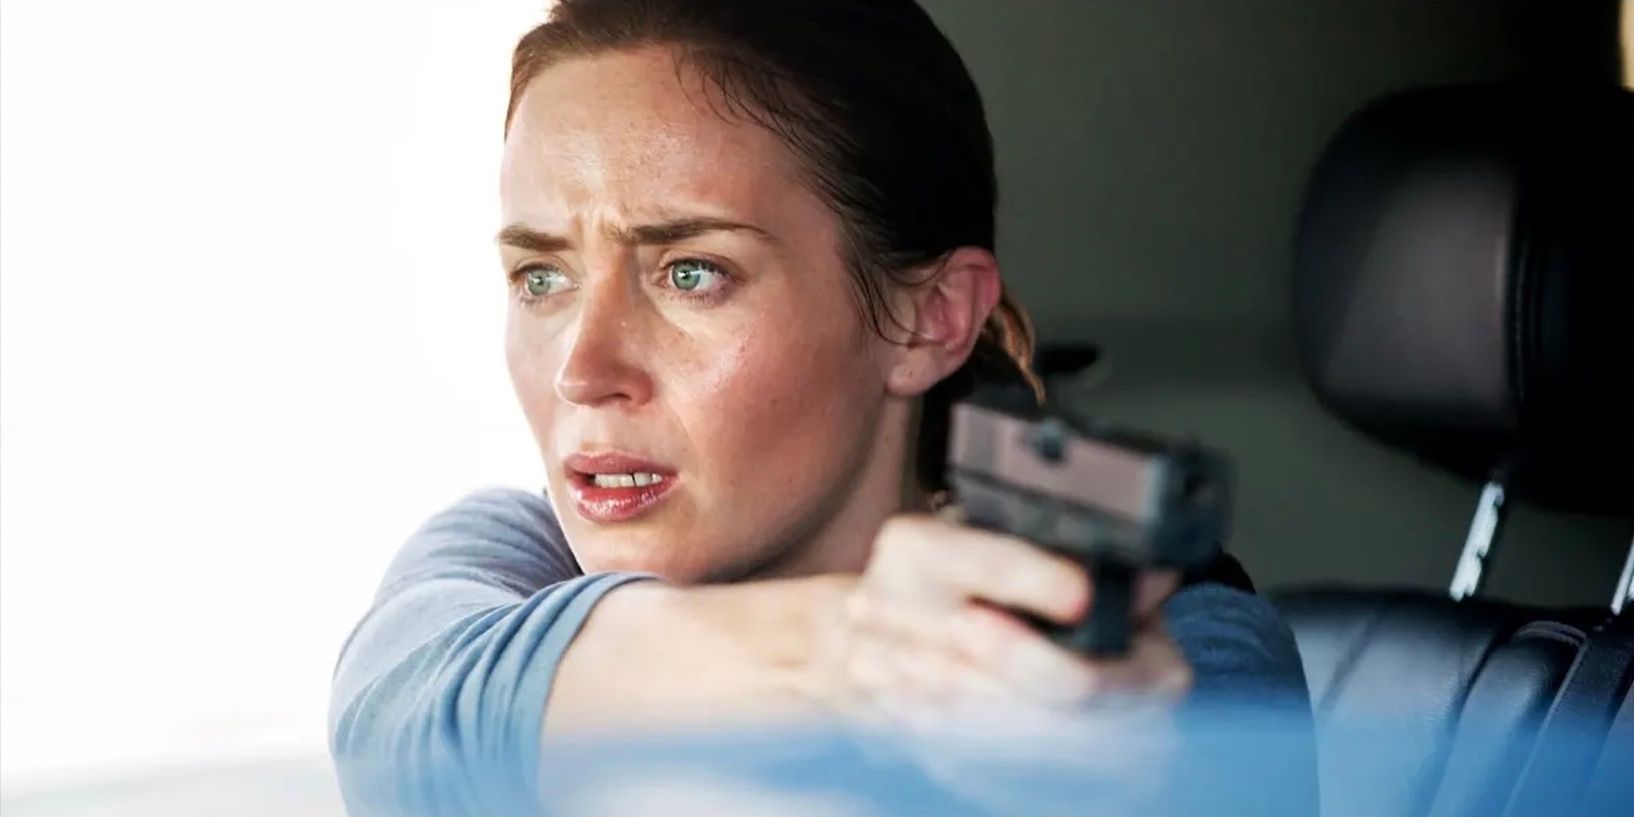 Emily Blunt Already Led One of the Best Action Movies Since 2015